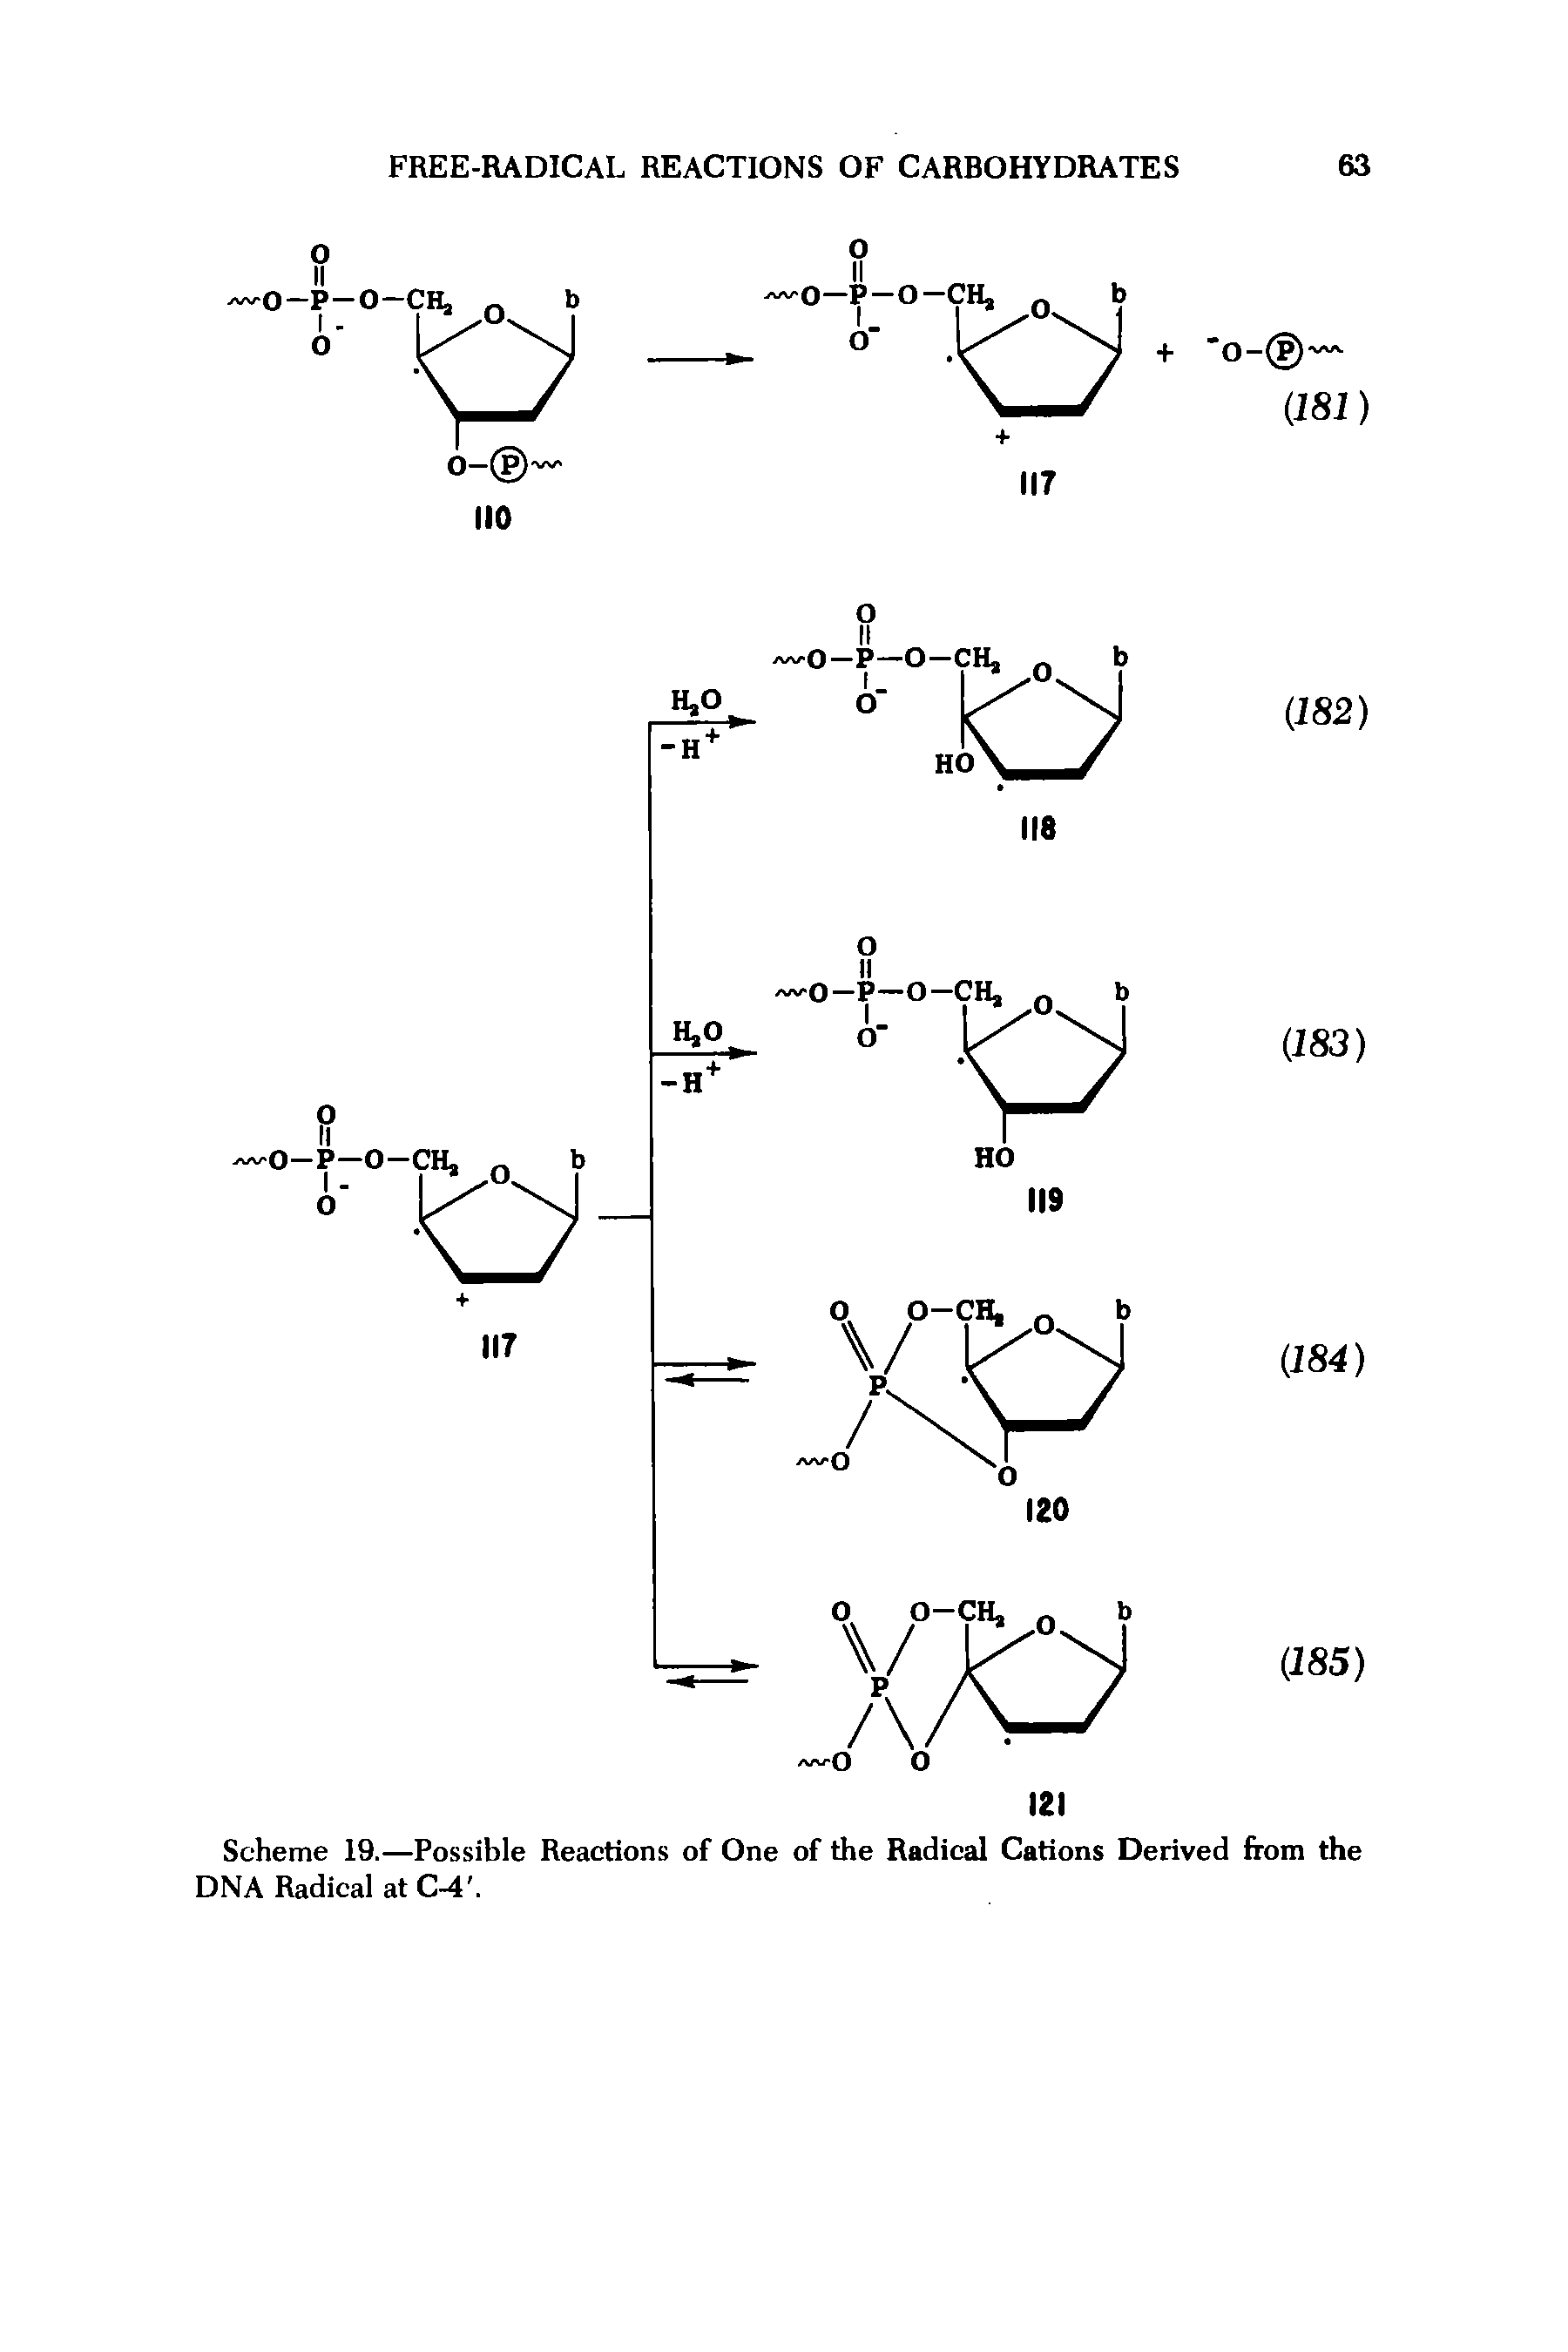 Scheme 19.—Possible Reactions of One of the Radical Cations Derived from the DNA Radical at C-4. ...